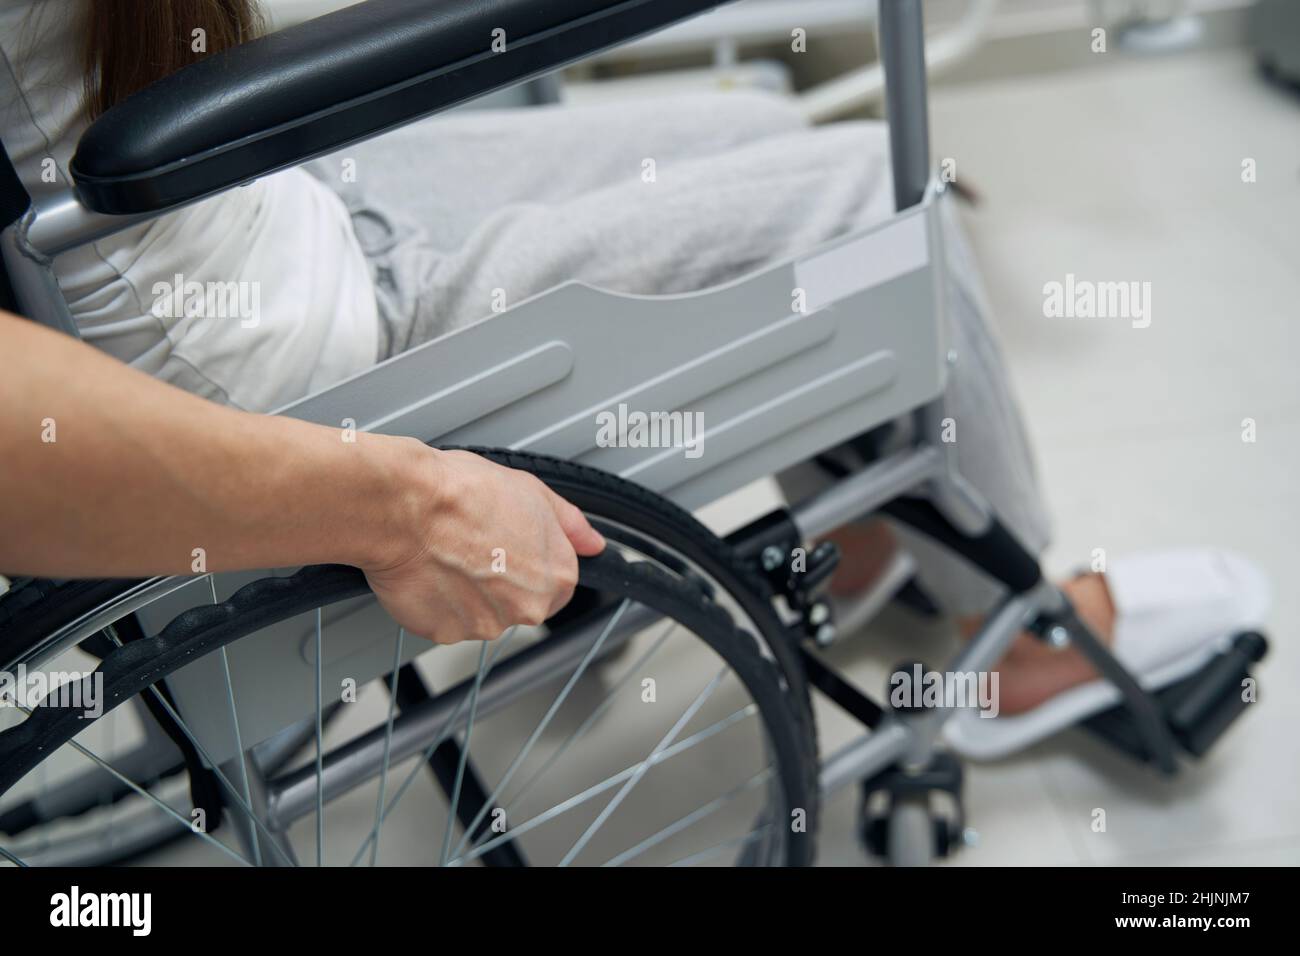 Person with disability propelling wheeled chair in hospital ward Stock Photo